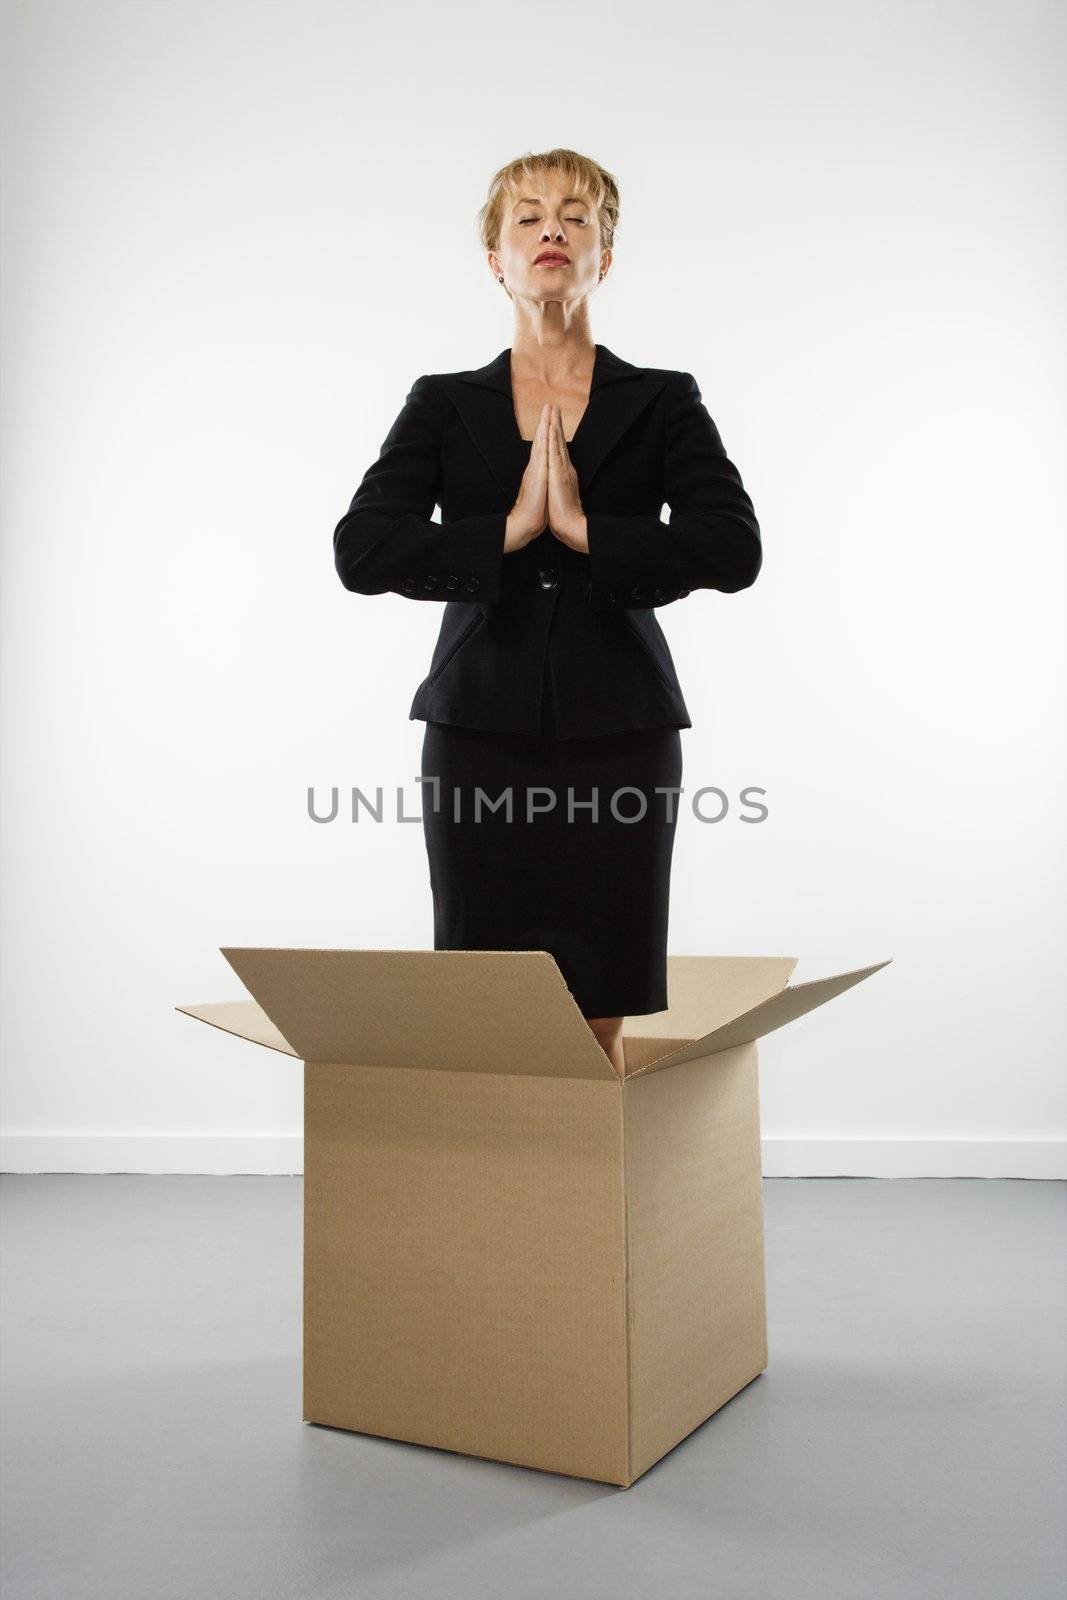 Caucasian businesswoman standing inside cardboard box meditating with eyes closed.